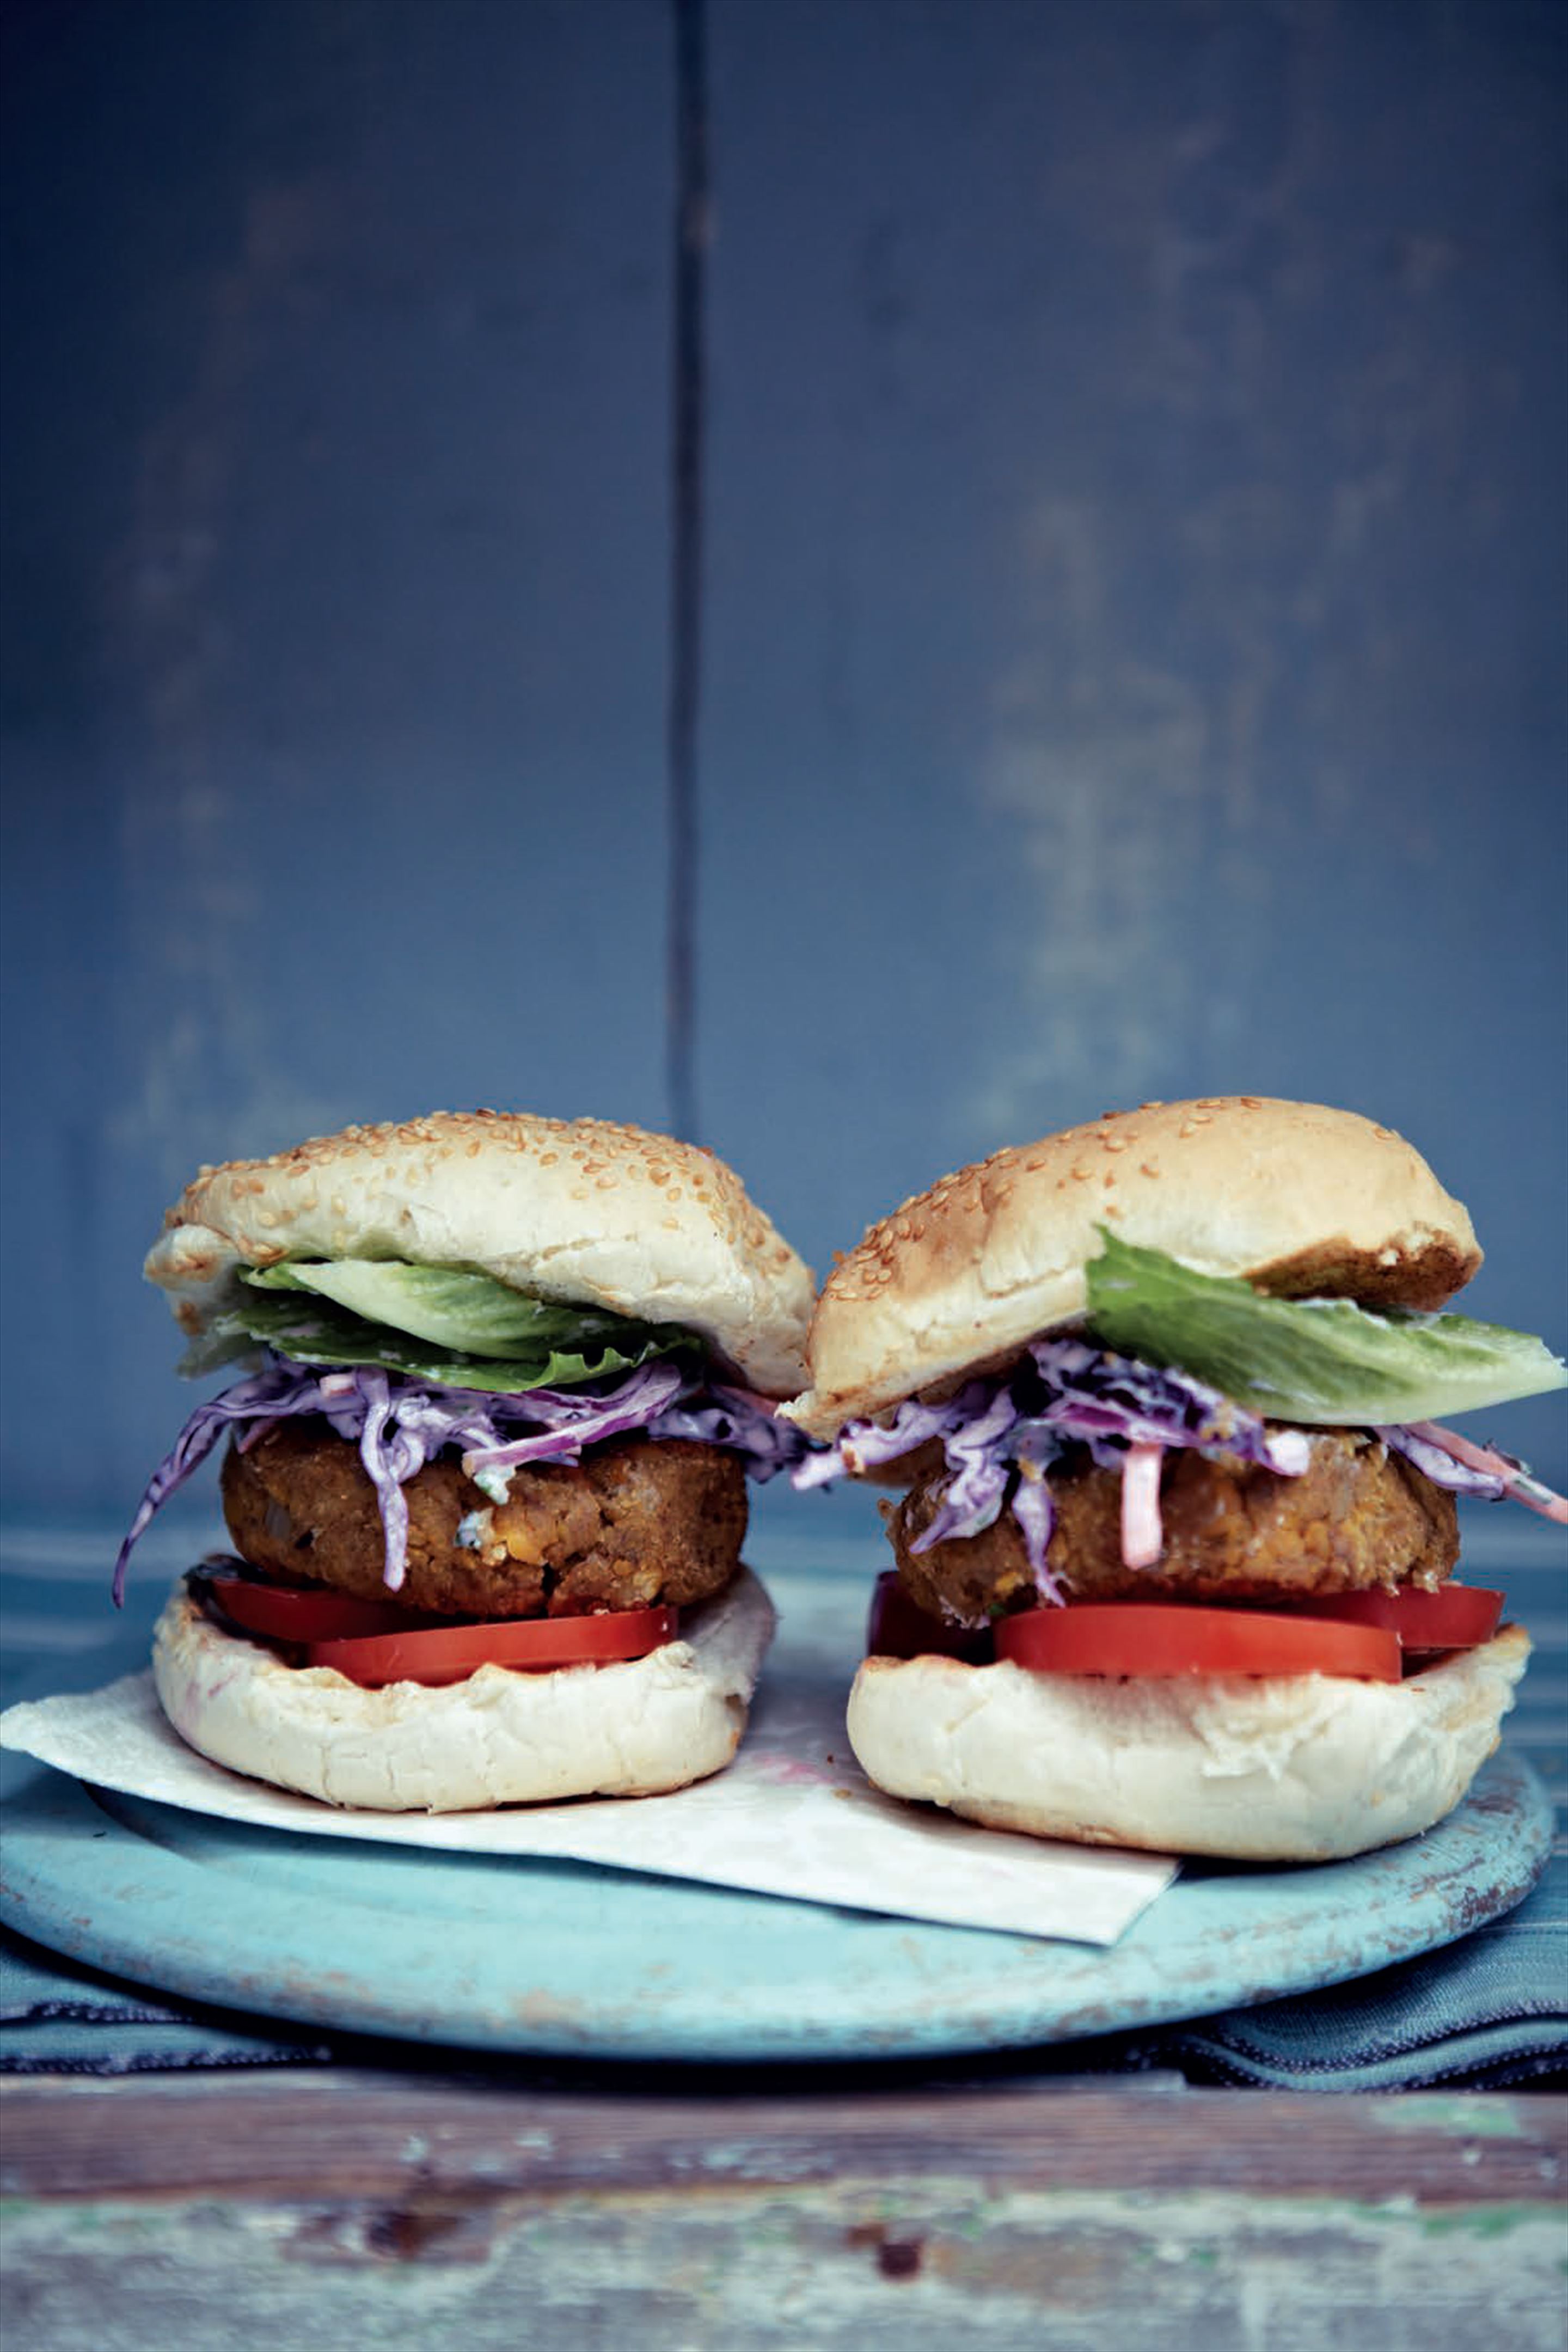 Mile-high chickpea burgers with Indian purple coleslaw